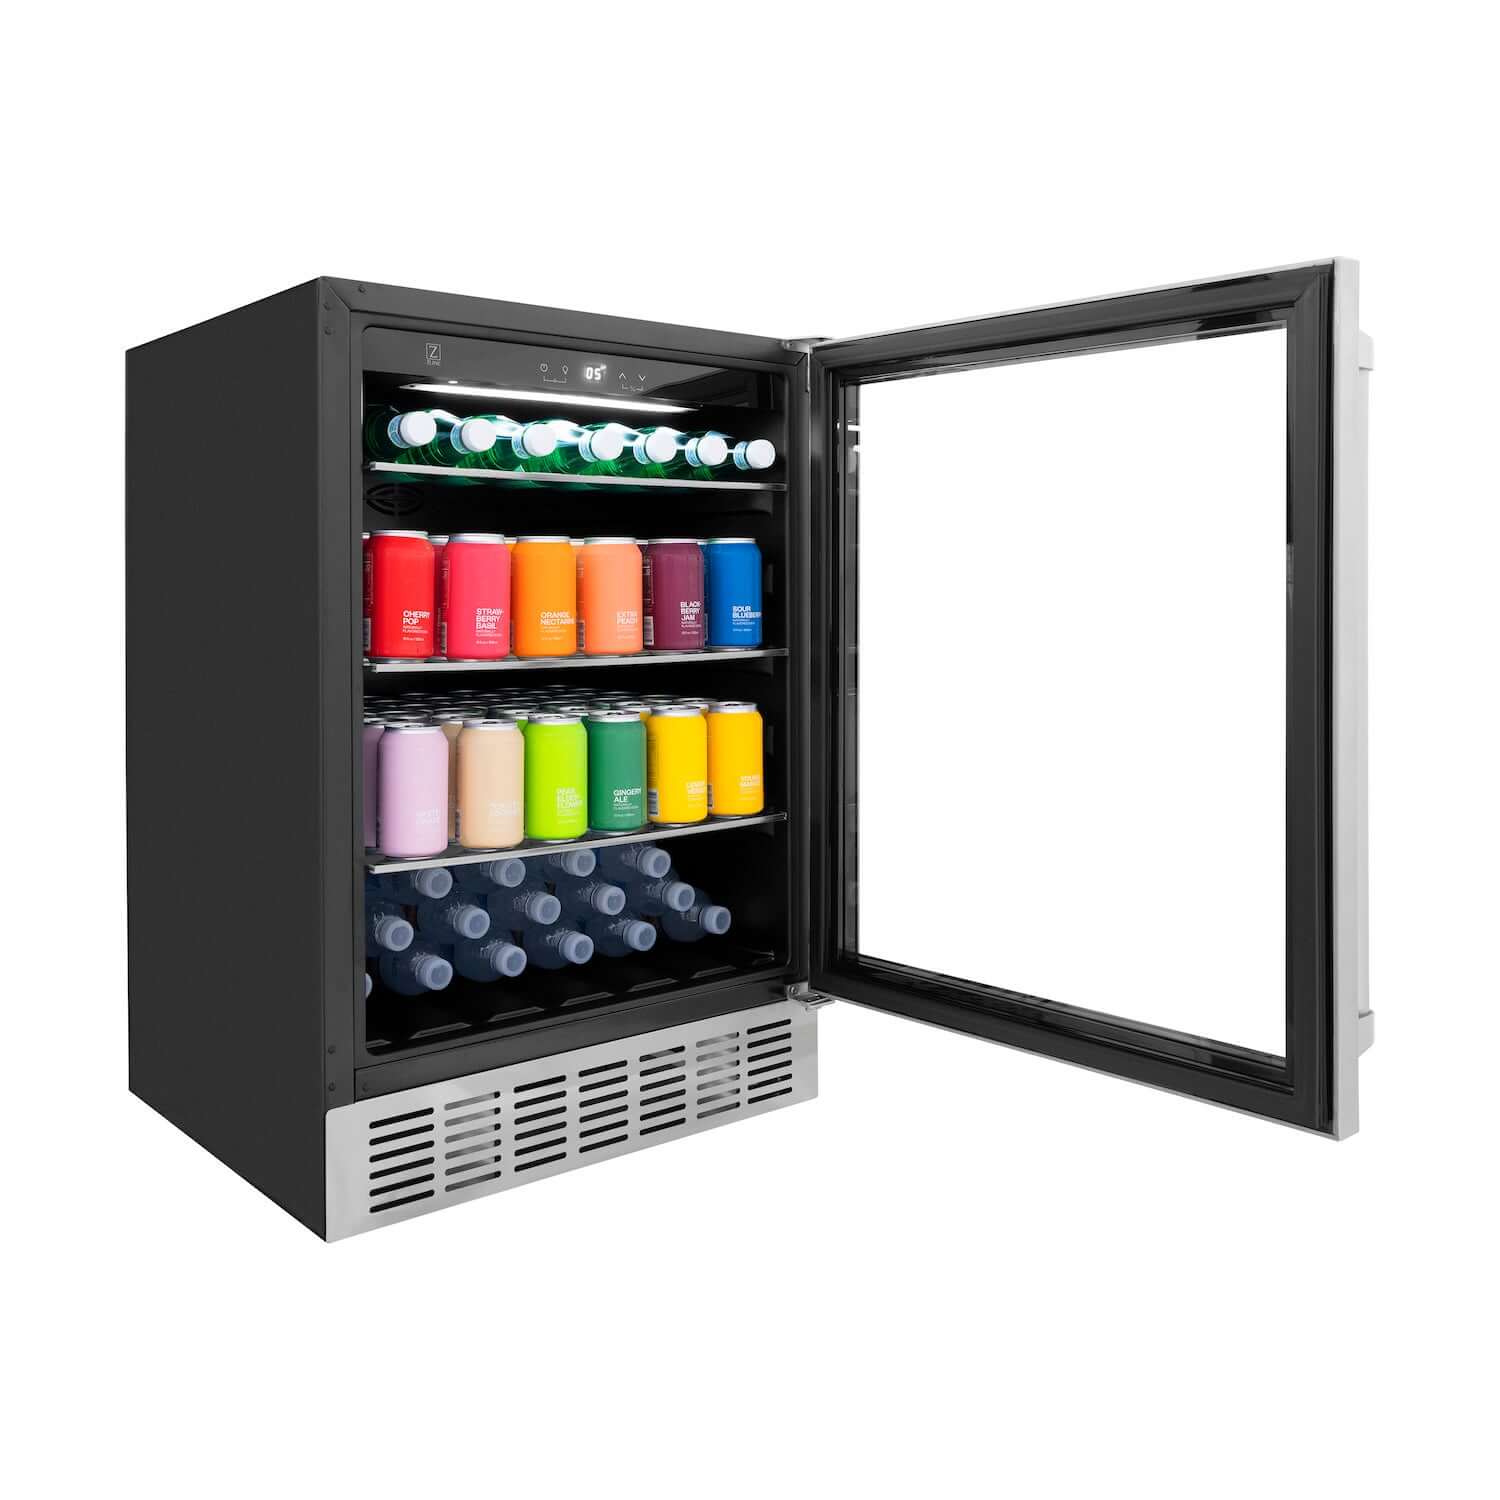 ZLINE beverage center with 3 levels of colorful drinks inside wide angle from side with door open.